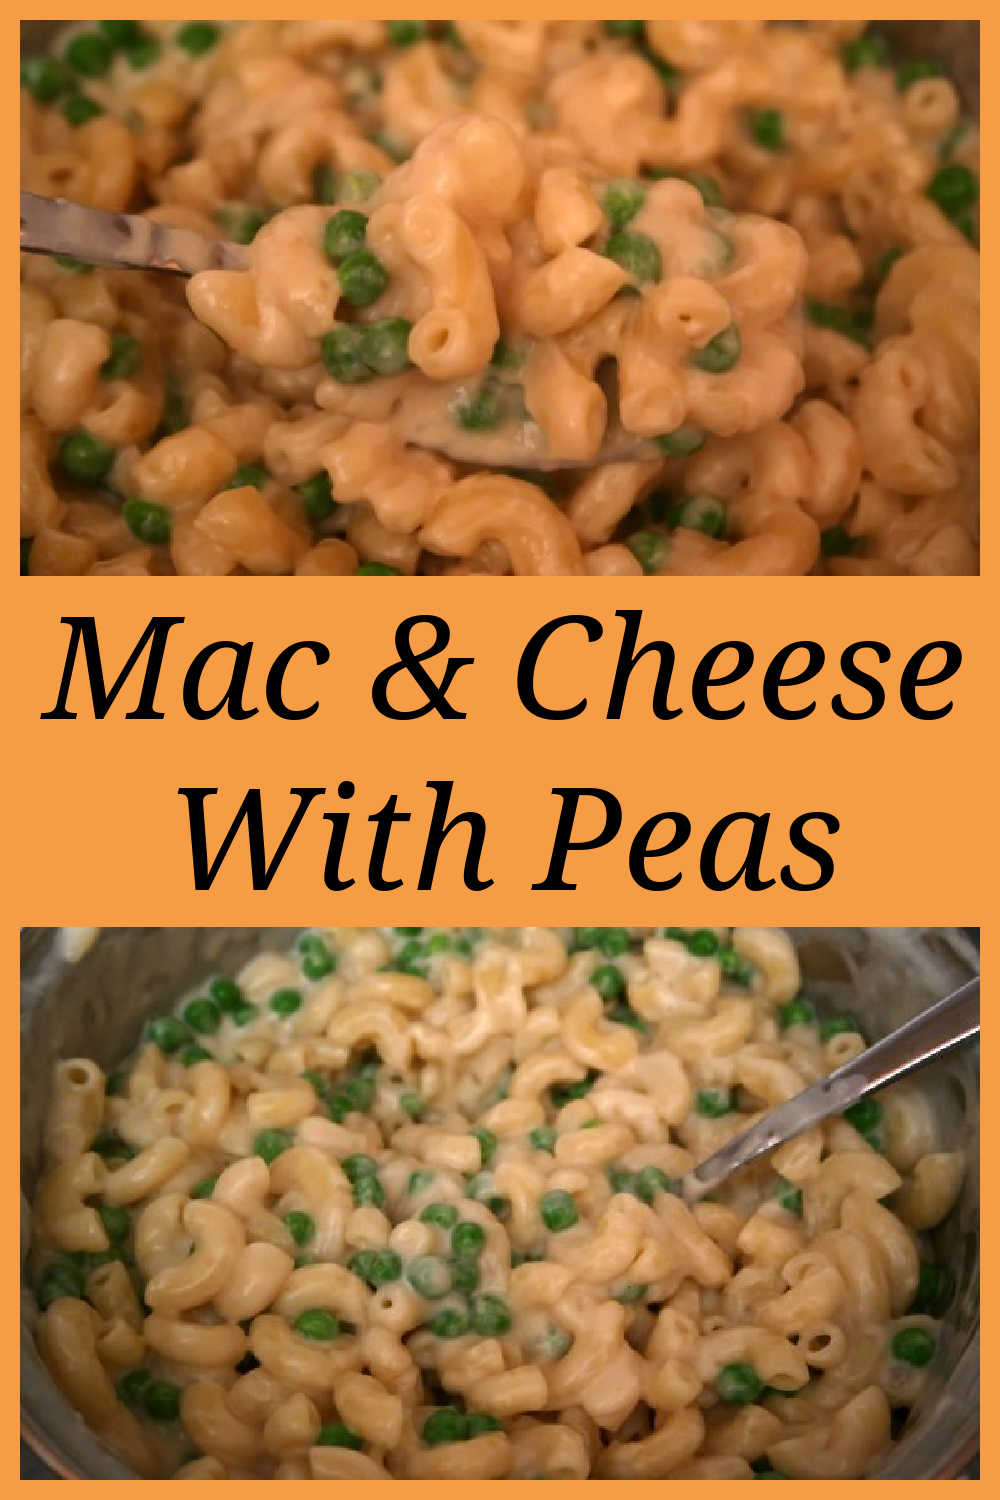 Mac And Cheese With Peas Recipe - Easy Budget Friendly One Pot Comfort Food Meals For Dinner - cheesy macaroni and peas - with the video tutorial.